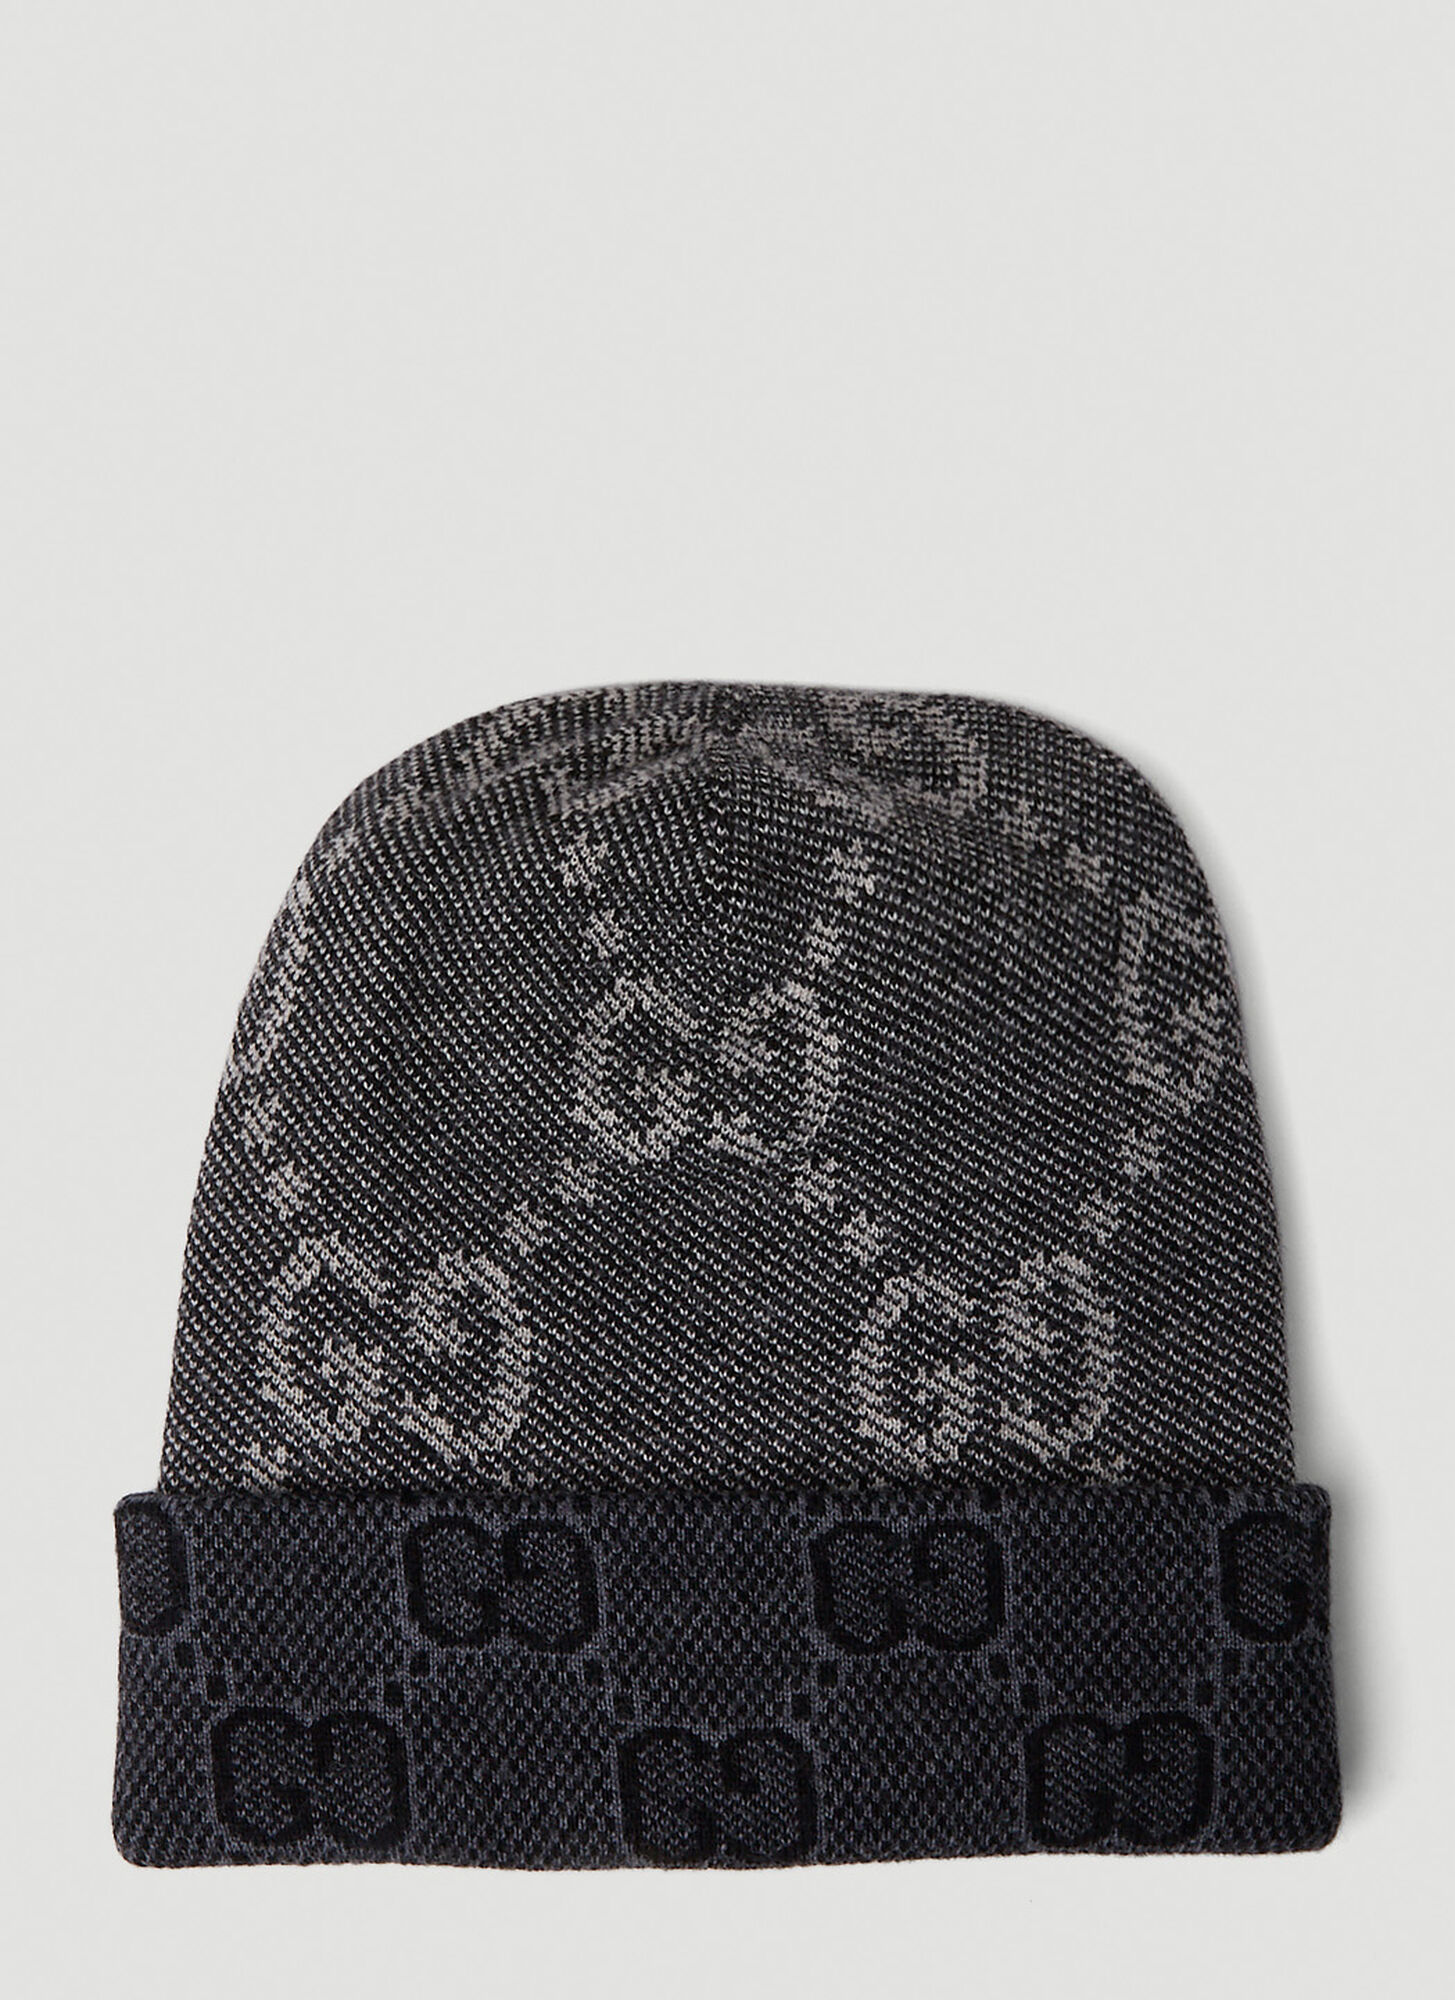 GUCCI: wool hat with jacquard GG monogram - White